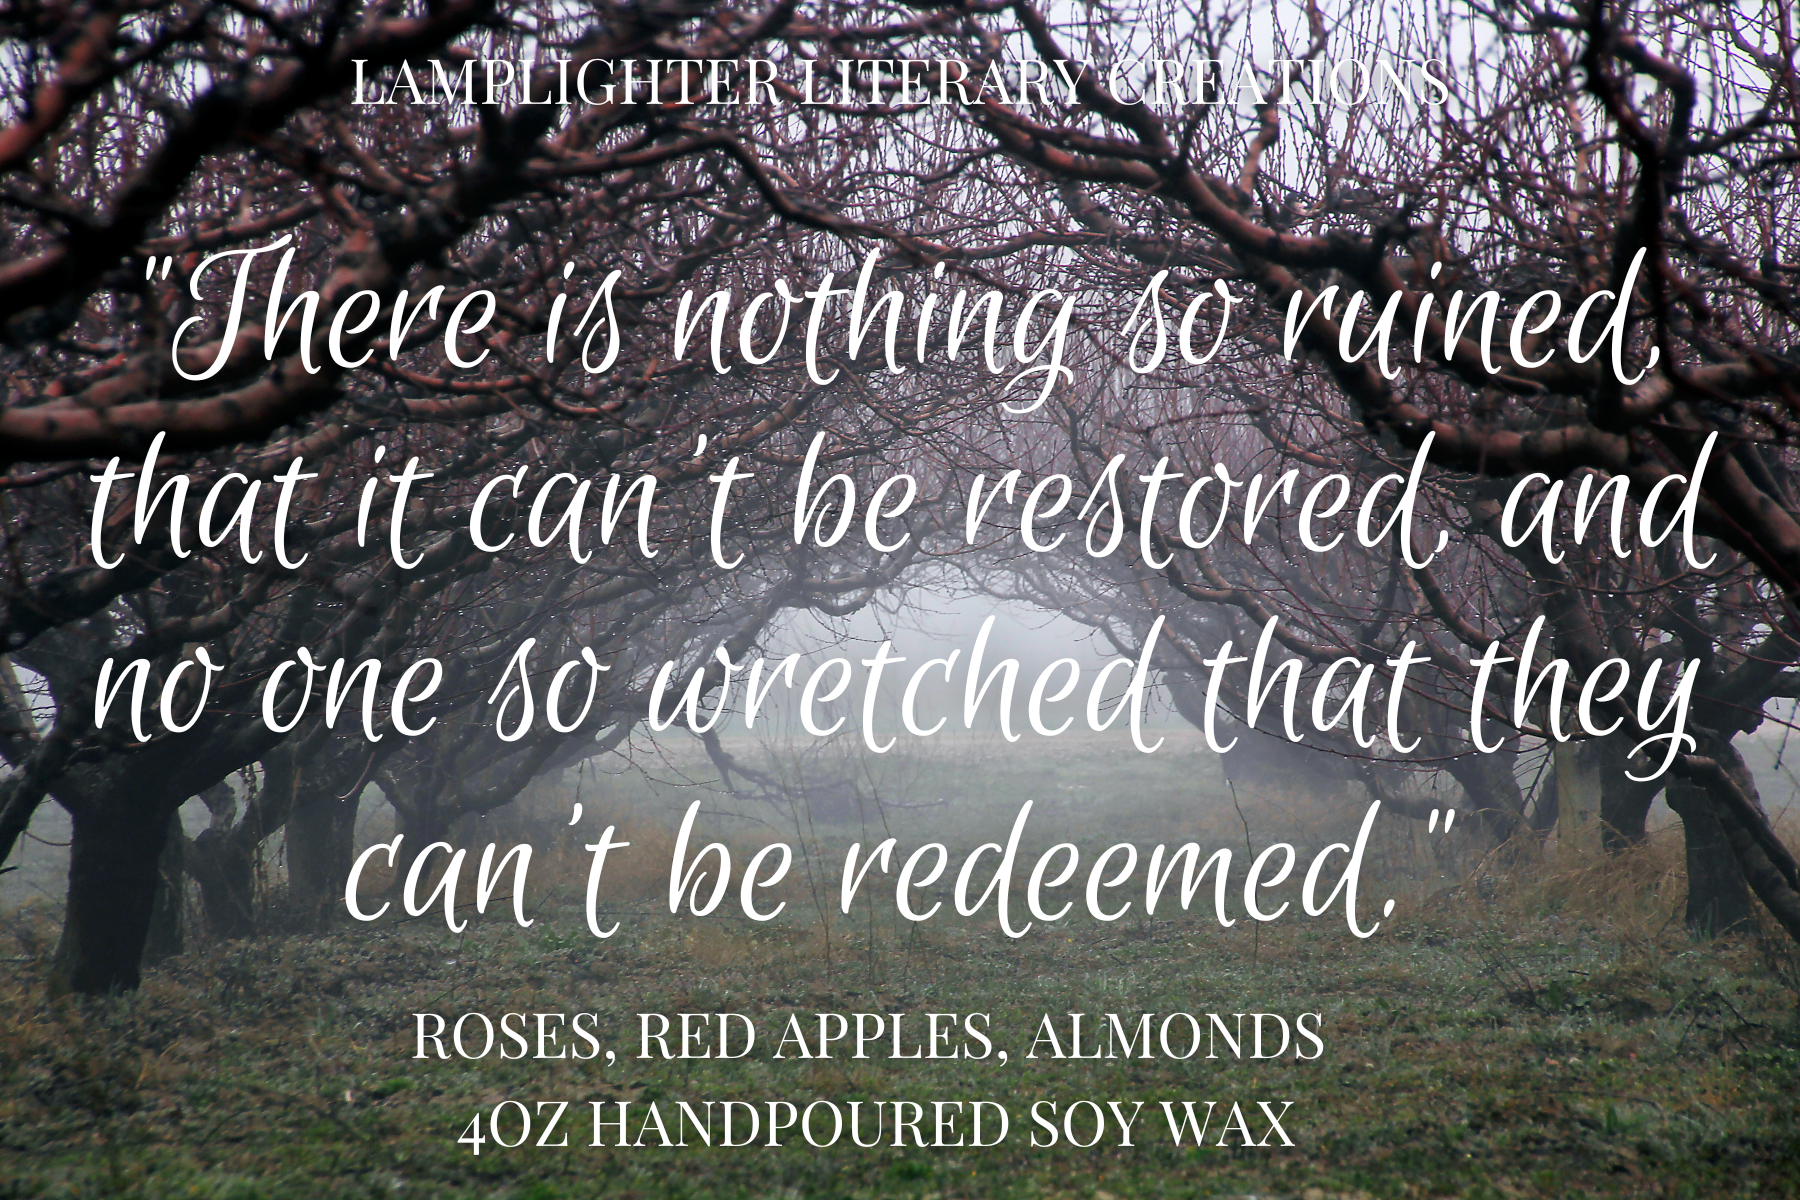 “There is nothing so ruined that it can’t be restored, and no one so wretched that they can’t be redeemed.”